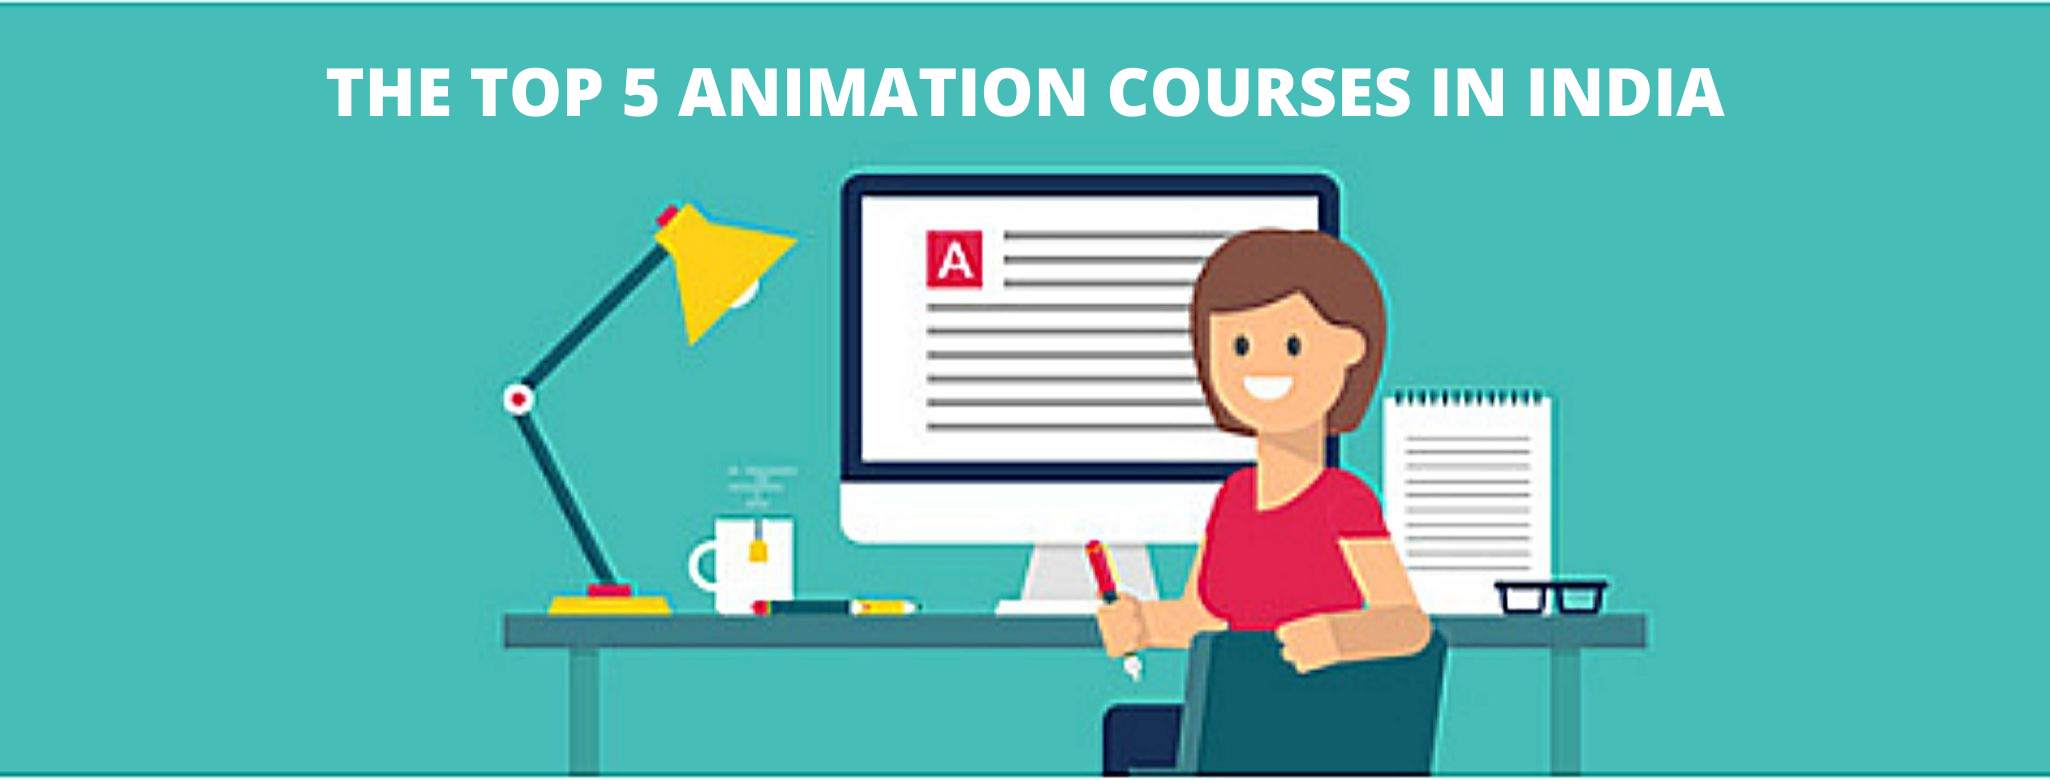 Animation Courses in India 